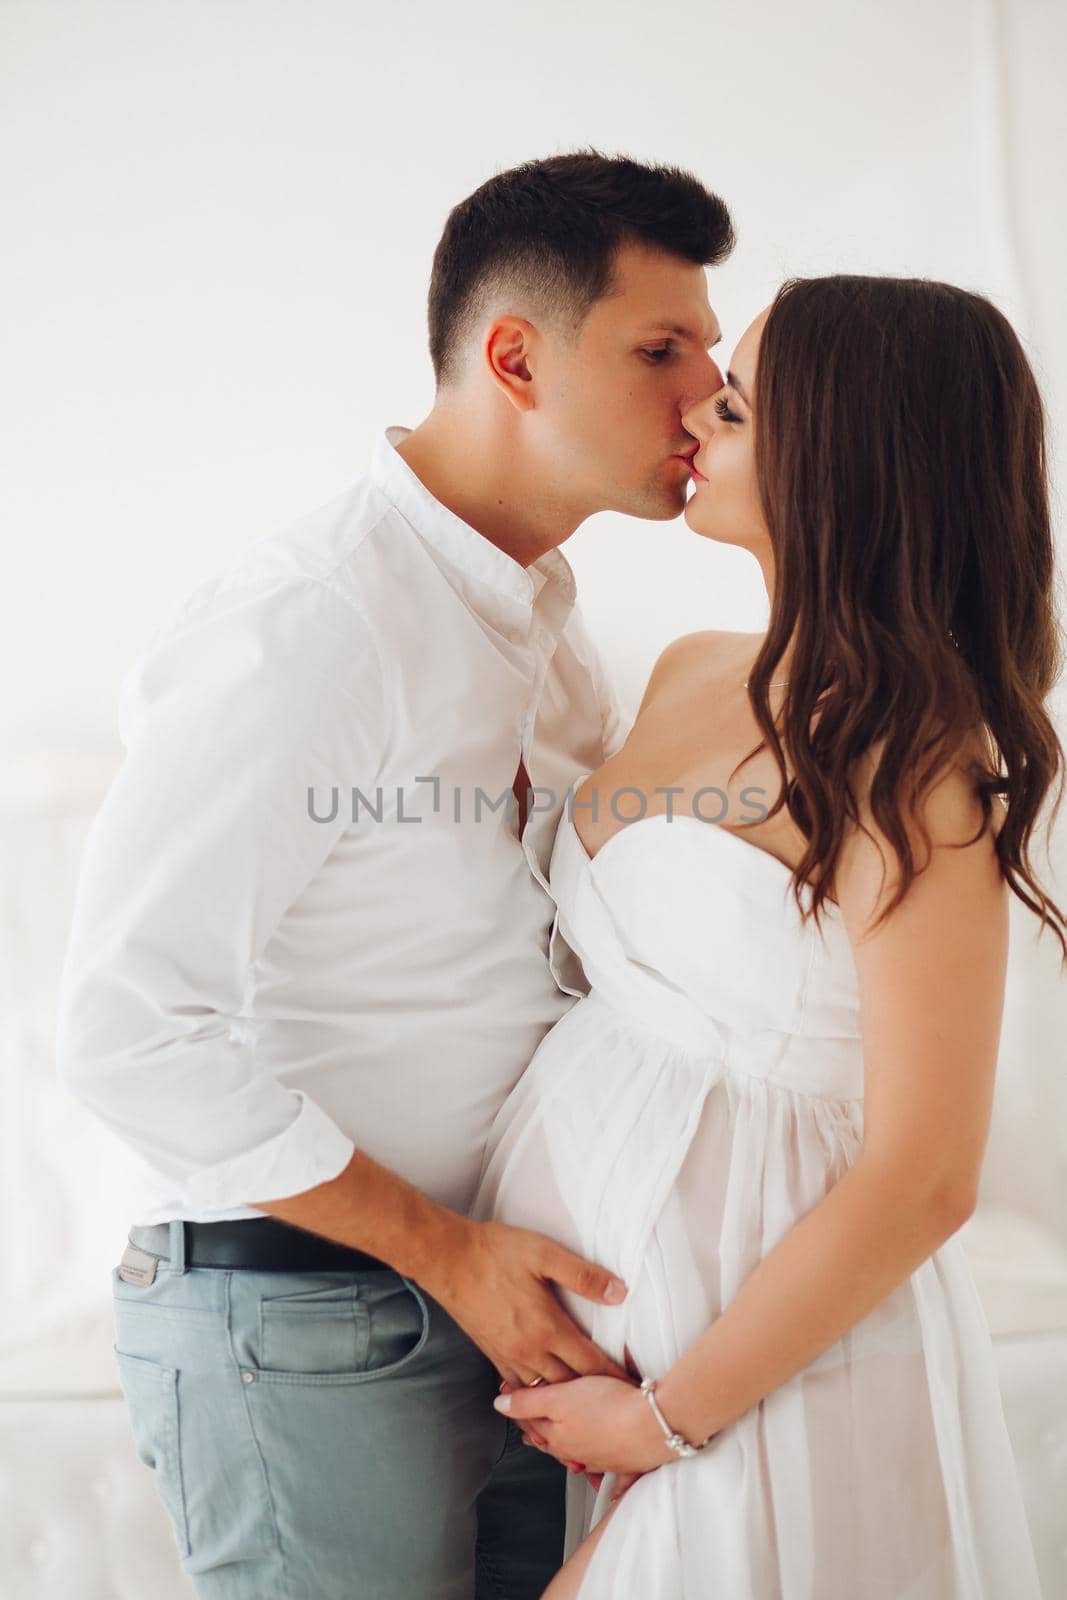 Happy future mother and father hugging each other, looking at camera and smiling. Attractive pregnant woman in white dress awaiting little baby. Concept of pregnancy and happiness.